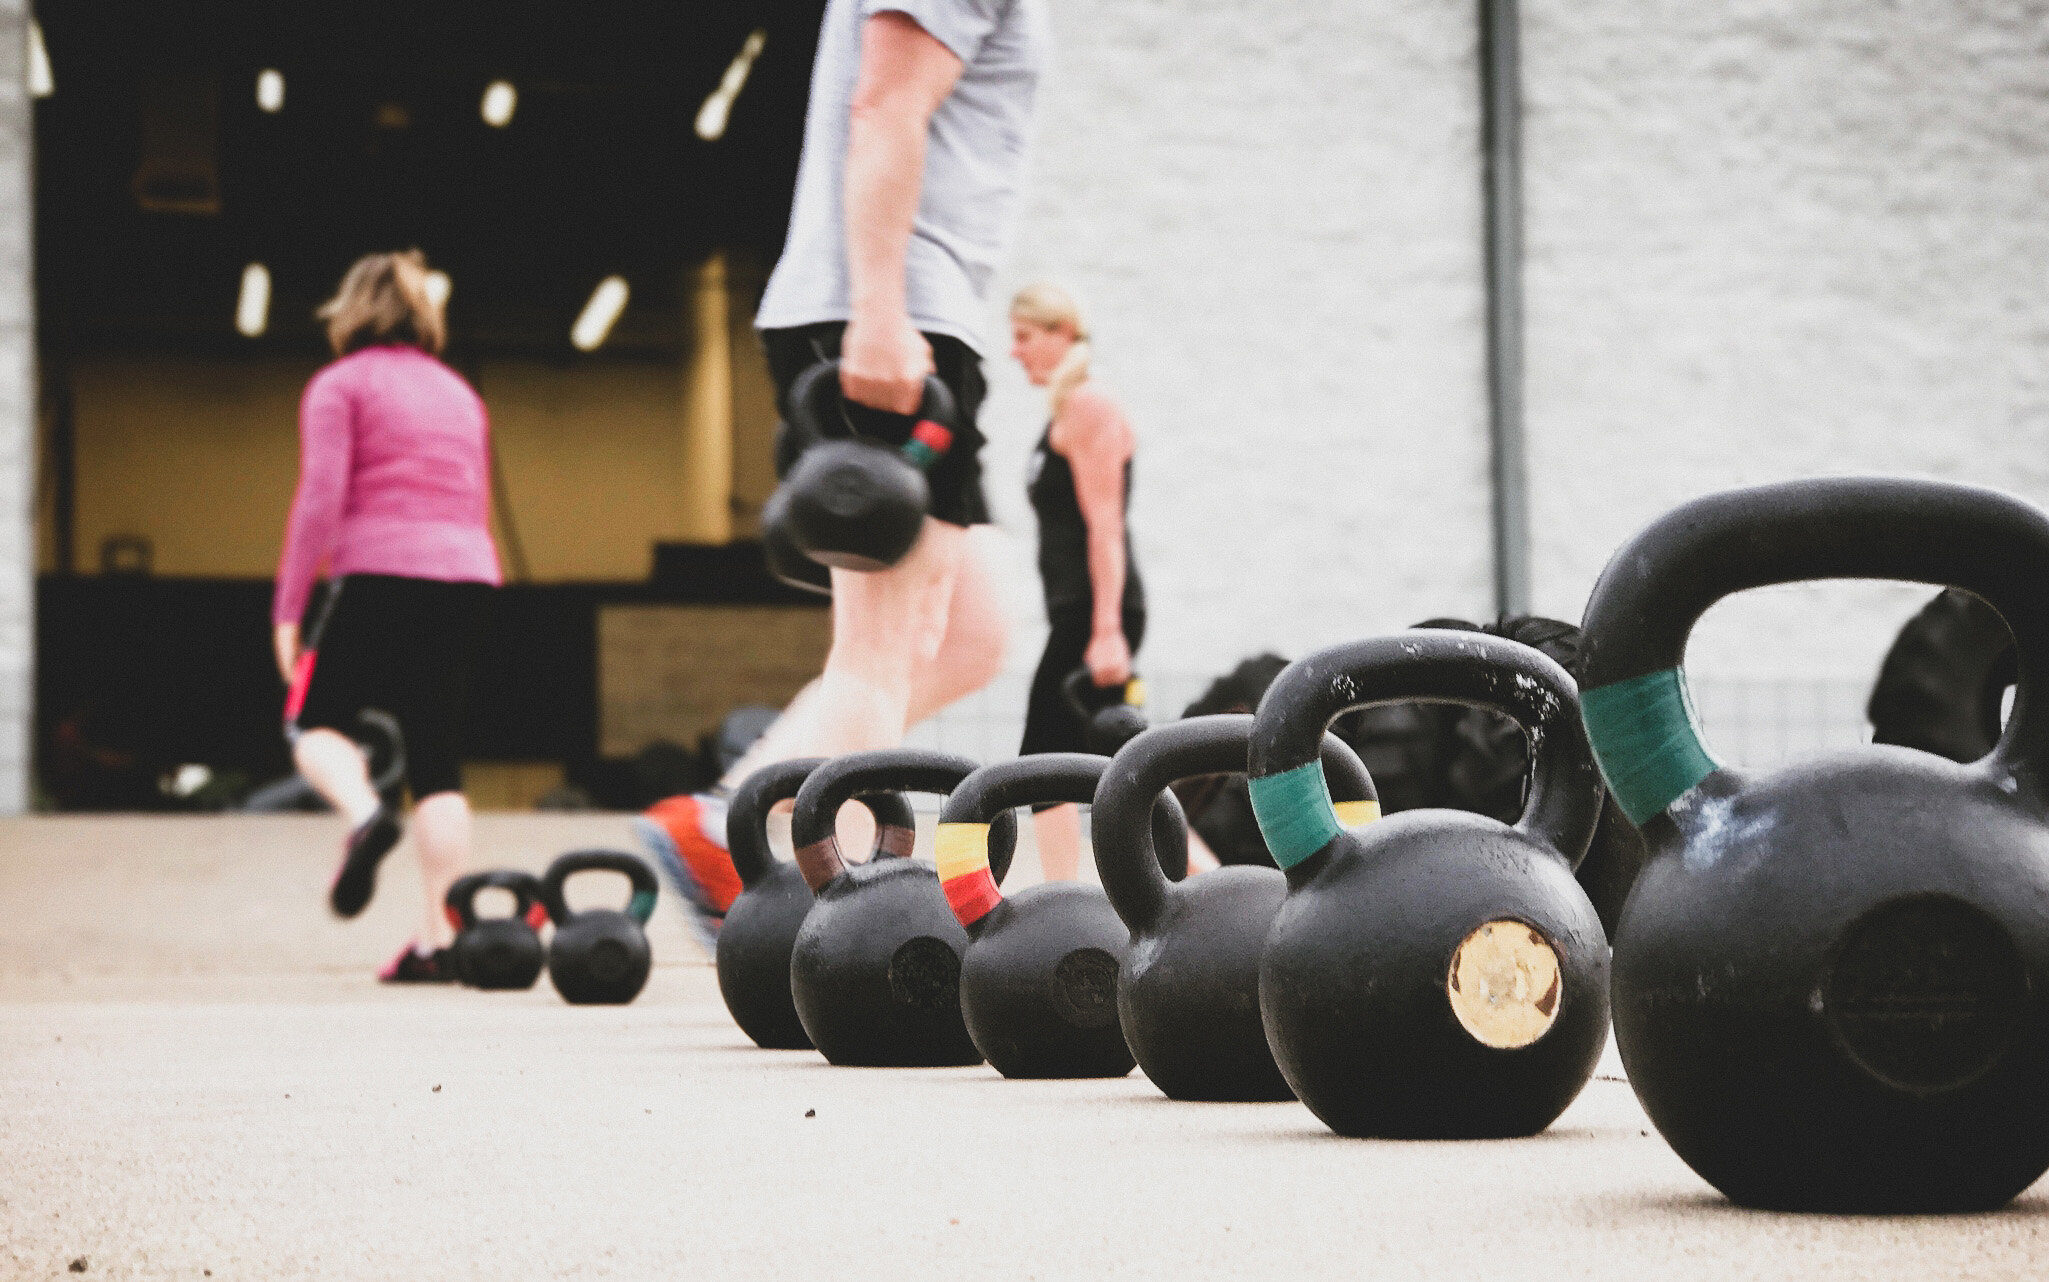 How to master the HSPU in CrossFit - THE PROGRM